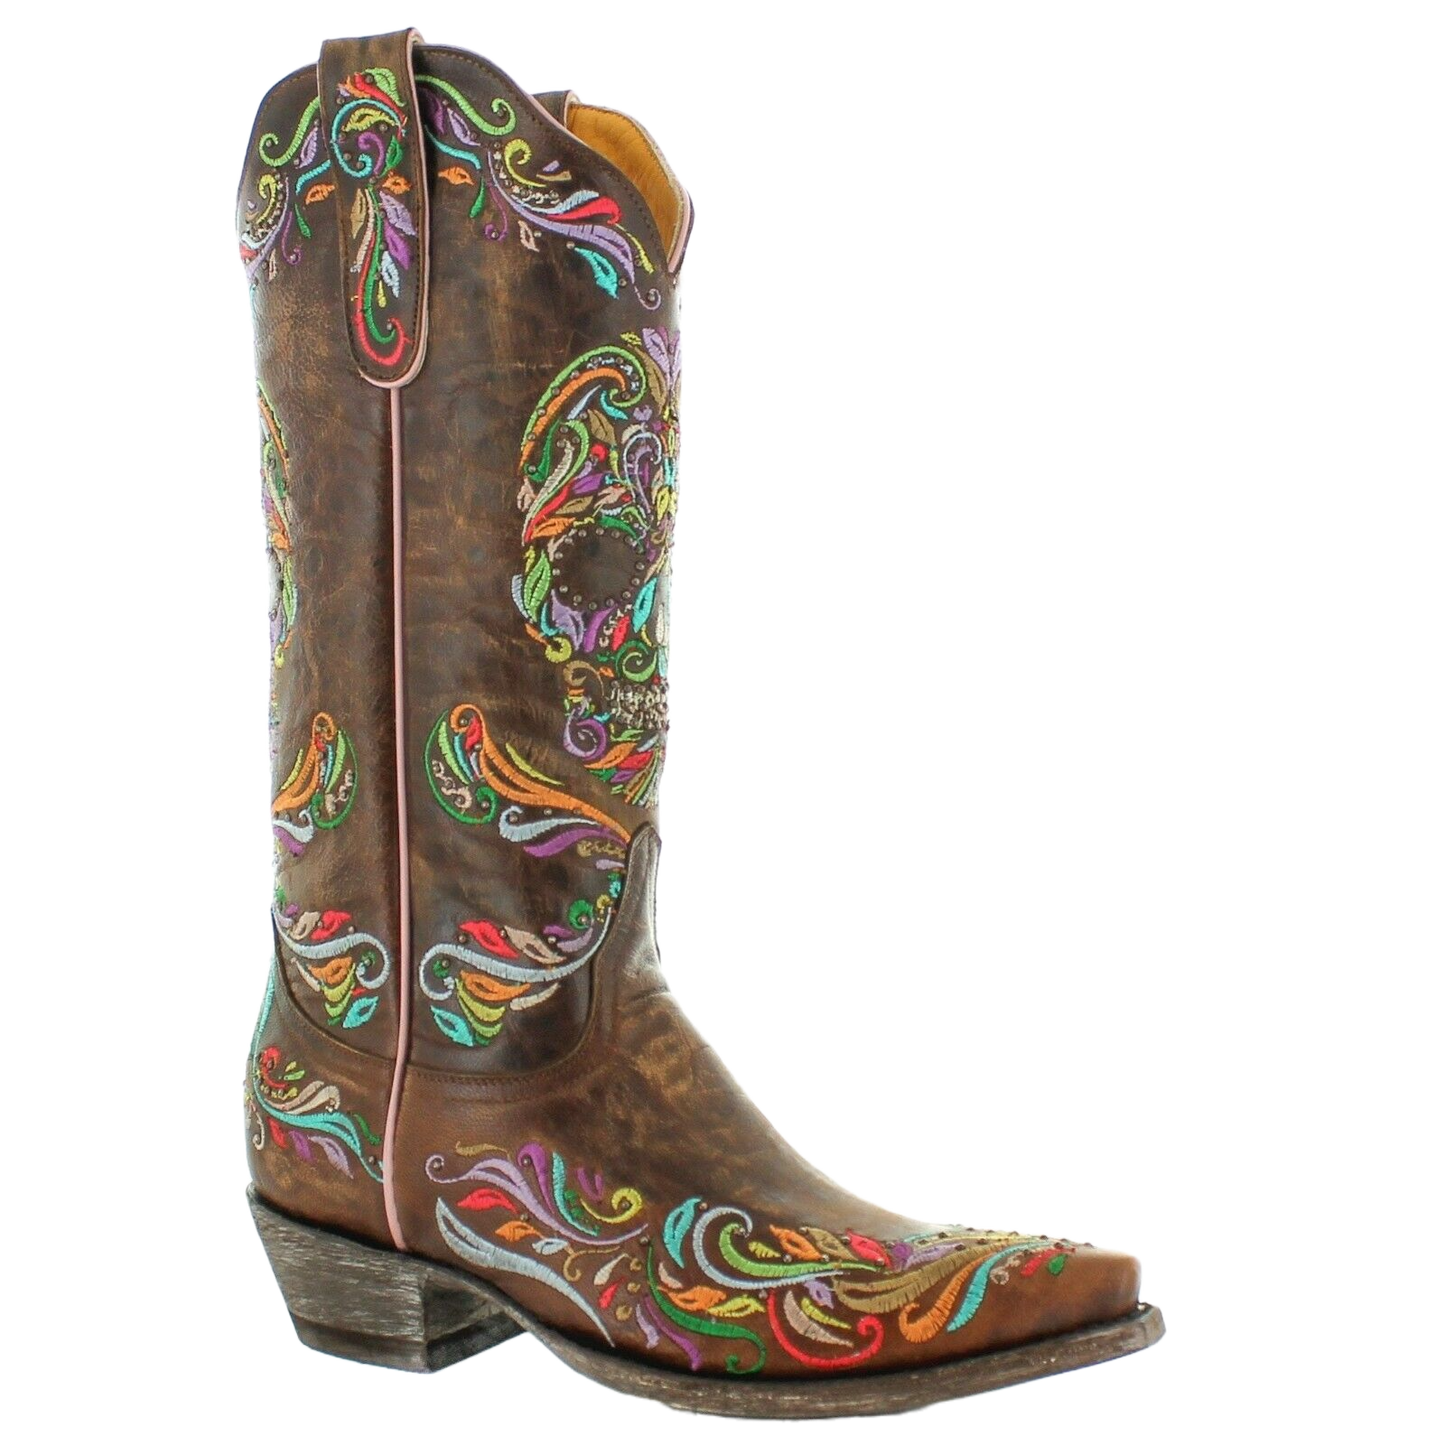 Load image into Gallery viewer, Old Gringo Ladies Dulce Calavera Brass Brown Sugar Skull Boots L3191-2
